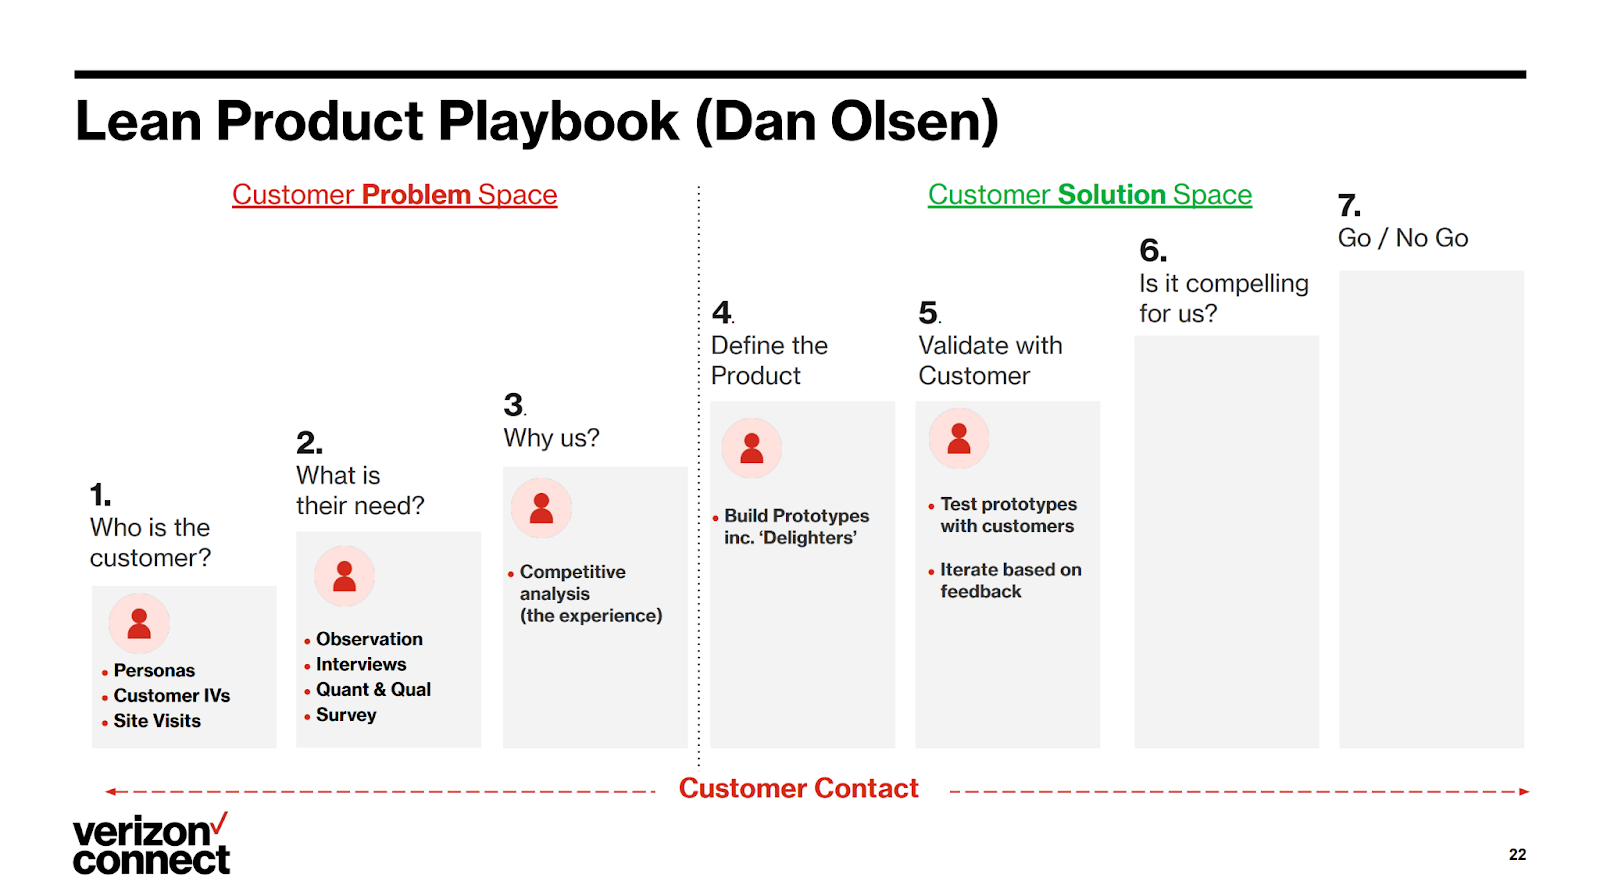 Lean Product Playbook: 1.Who is the customer, 2. What is their need, 3.Why us, 4.Define the Product, 5.Validate with Customer, 6. Is it compelling for us?, 7.Go/ No Go